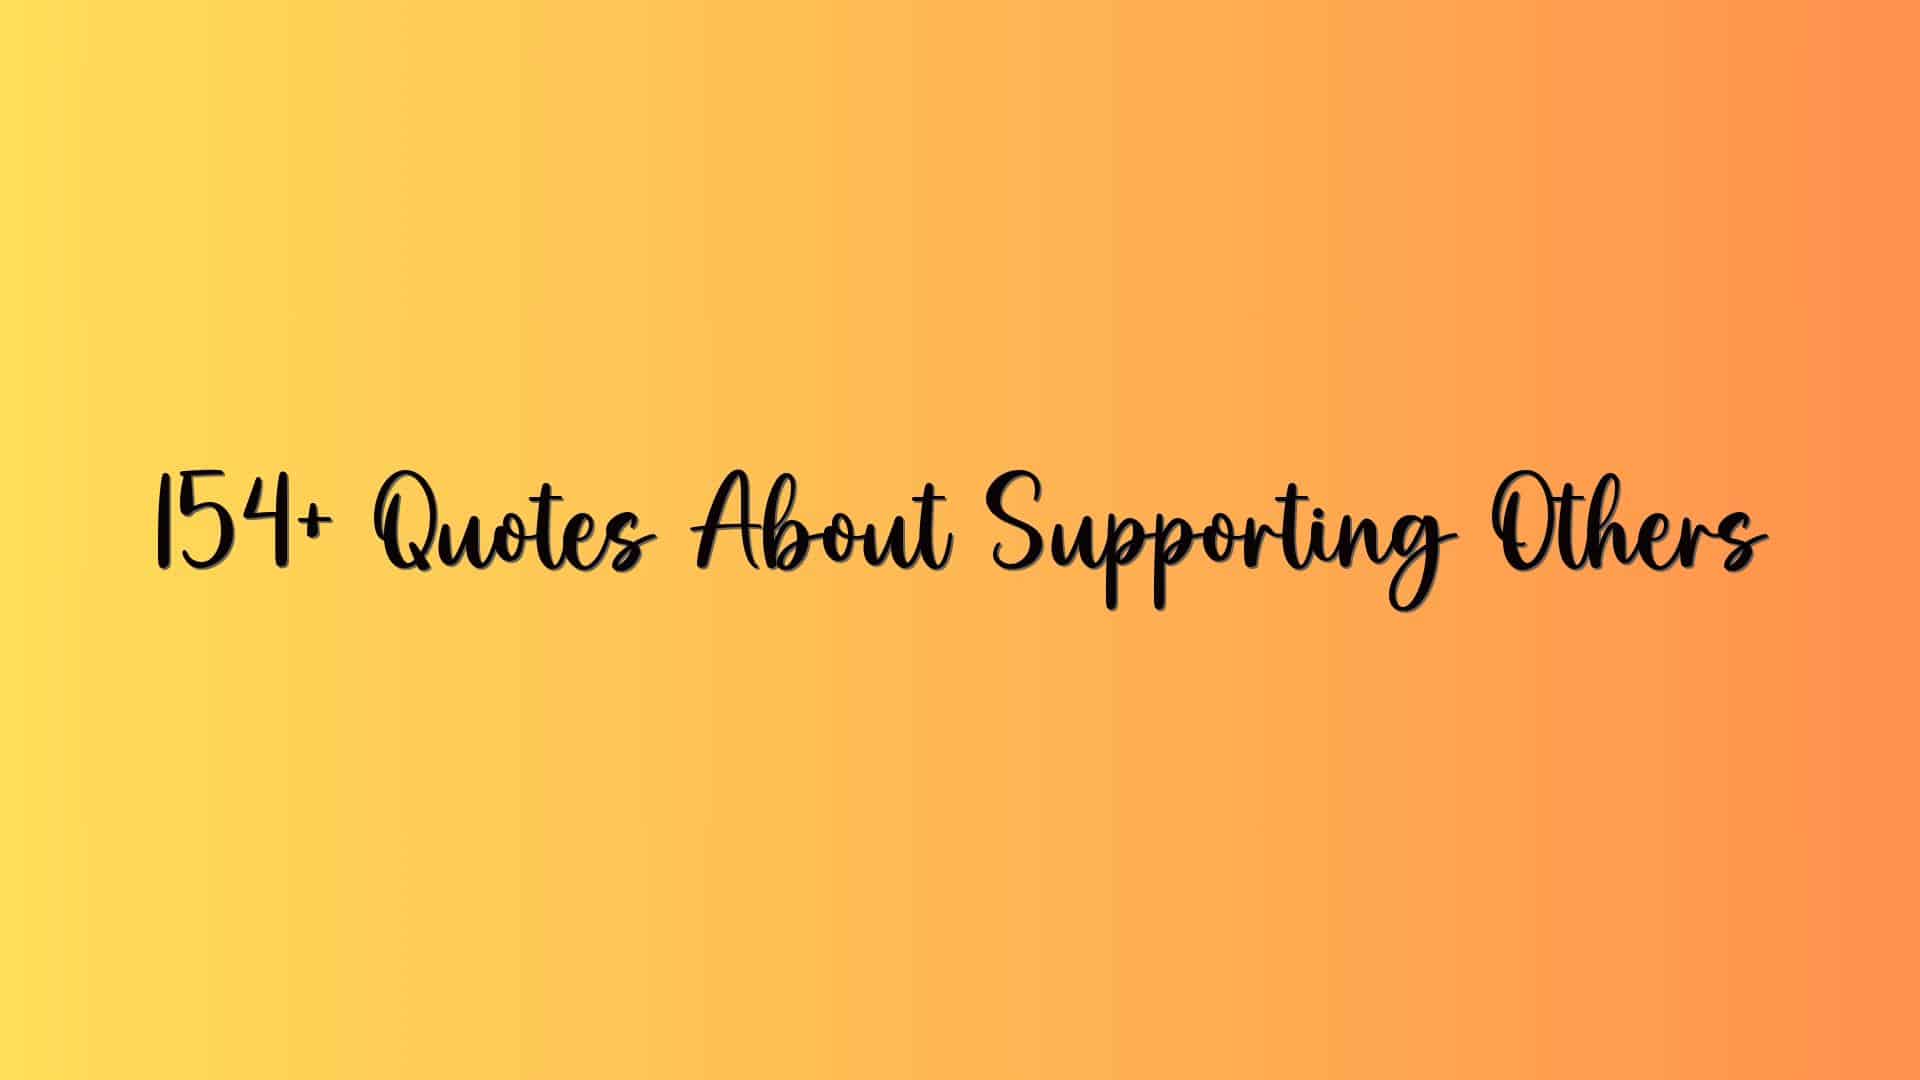 154+ Quotes About Supporting Others